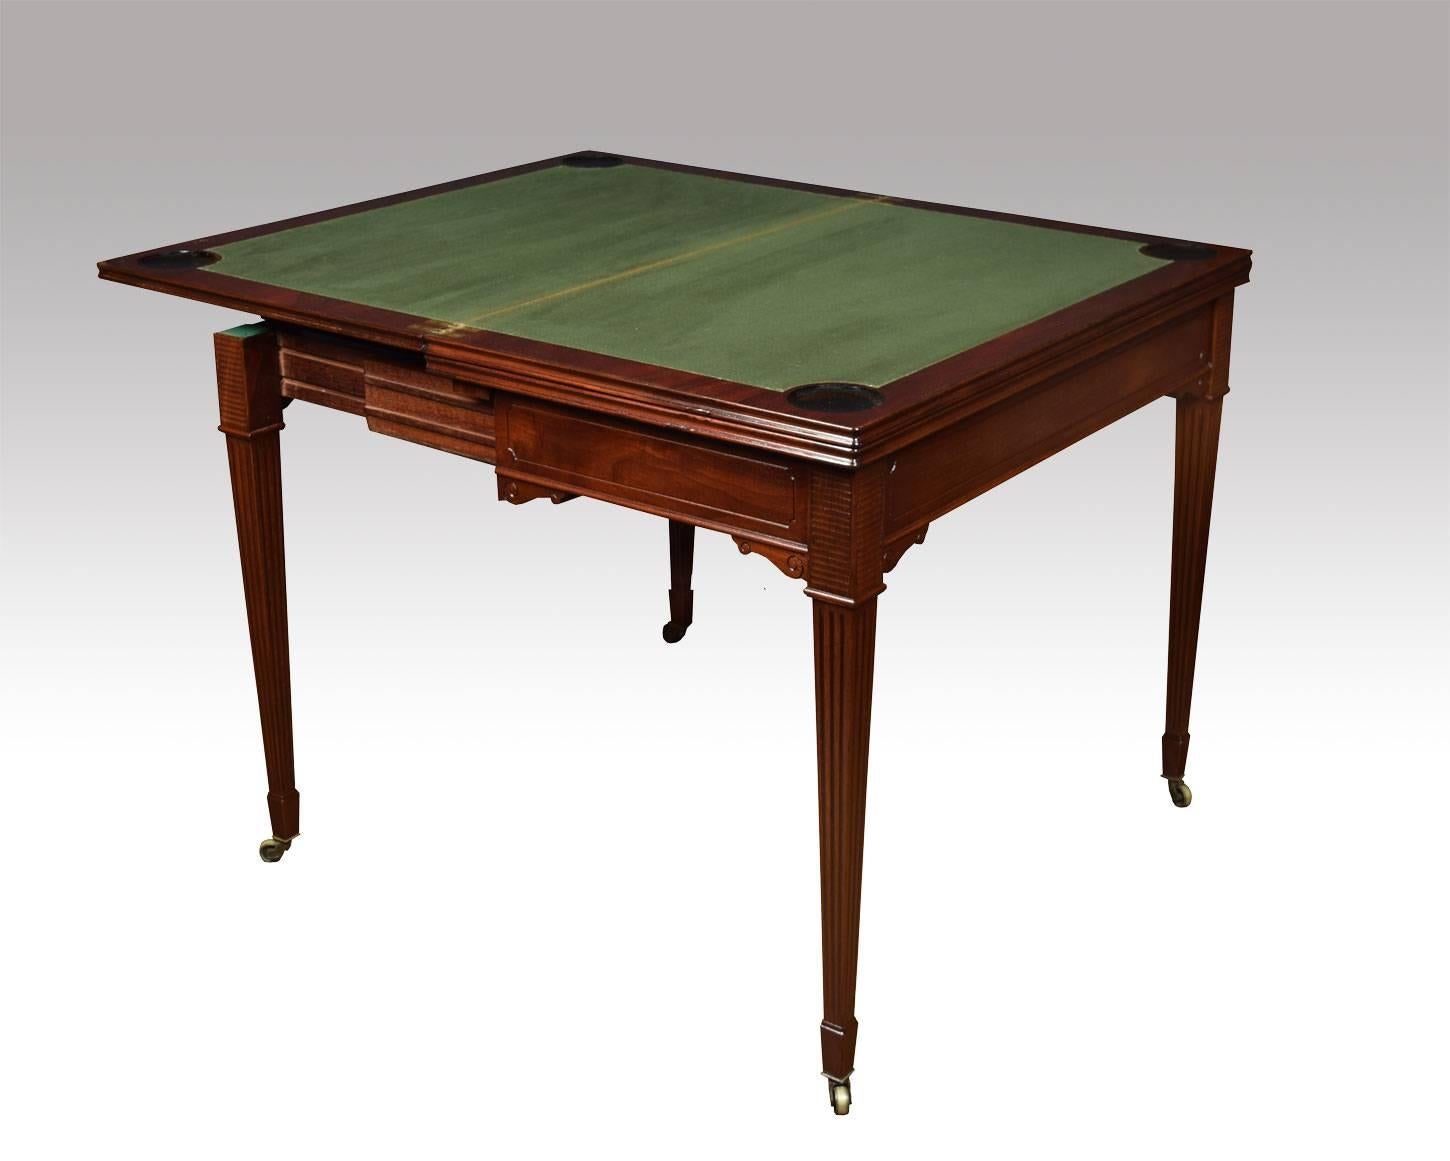 Edwardian mahogany triple top games table for cards and roulette. The large rectangular mahogany hinged triple top opens to reveal a gaming interior for playing cards and then opens again to reveal a Roulette table. The table raised up on solid